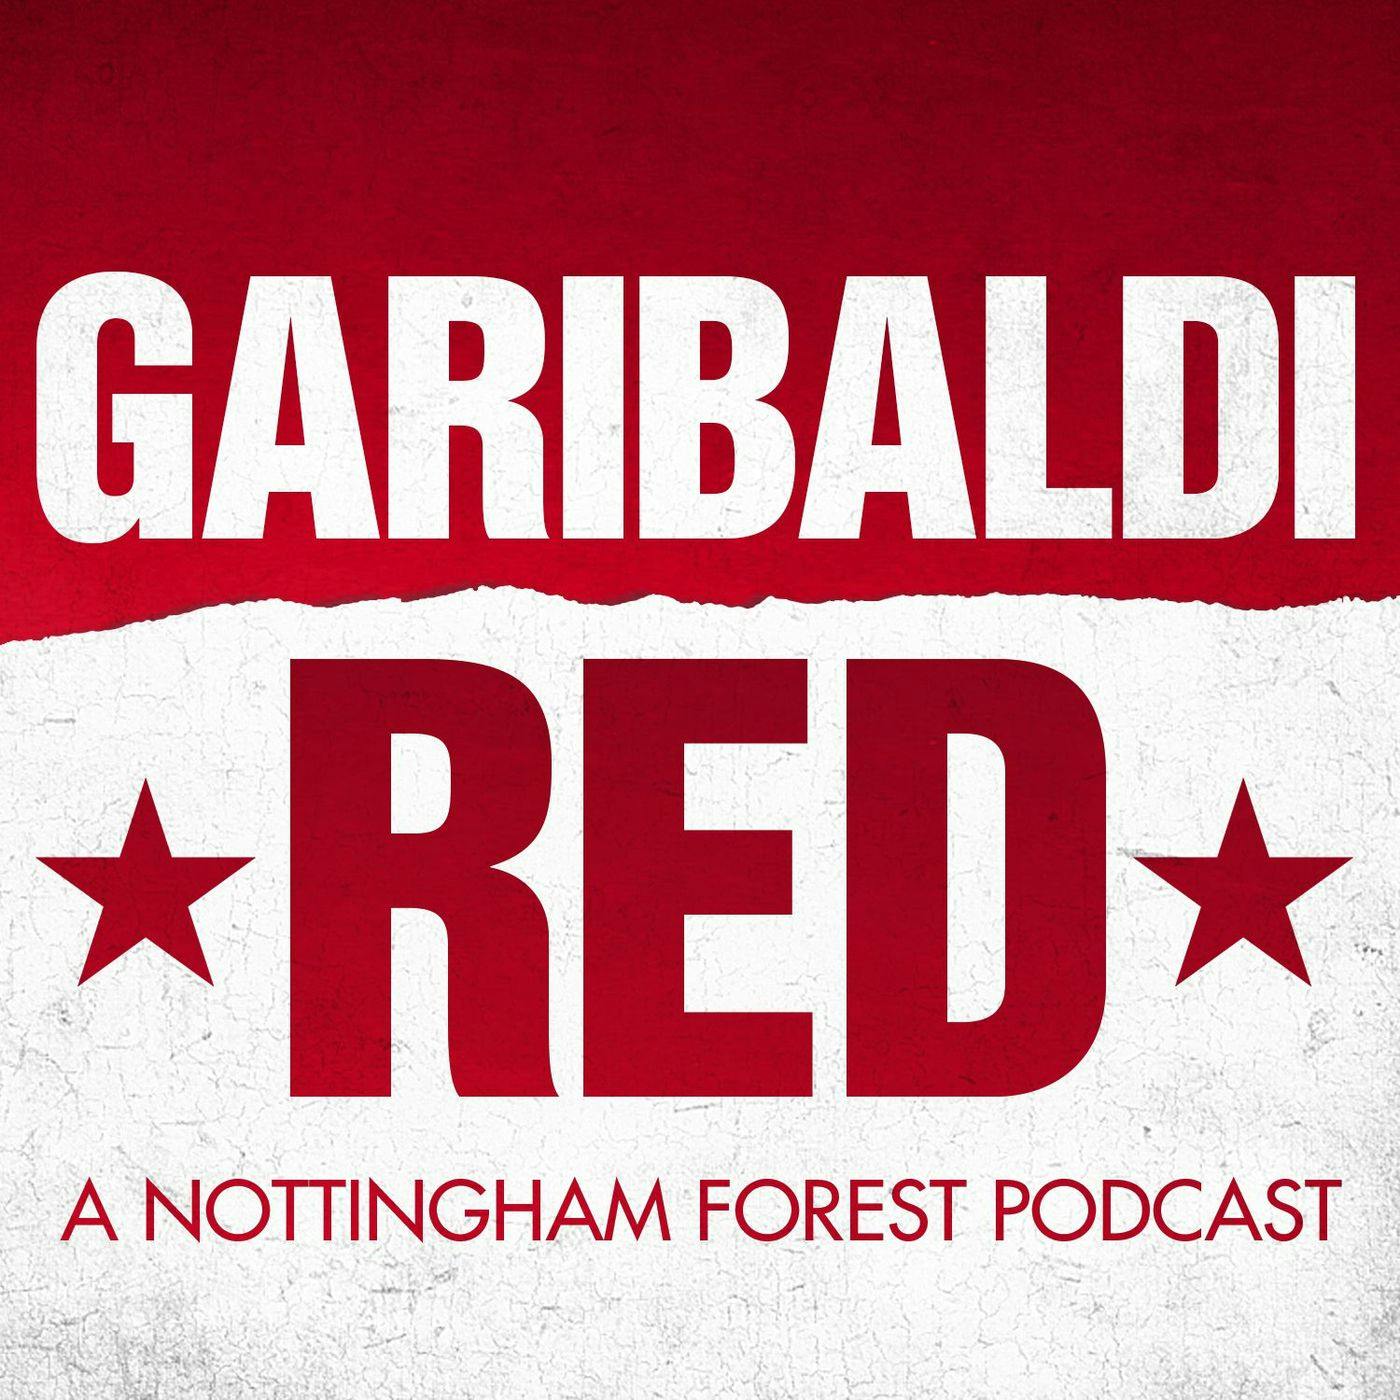 5 things Nottingham Forest must do this summer